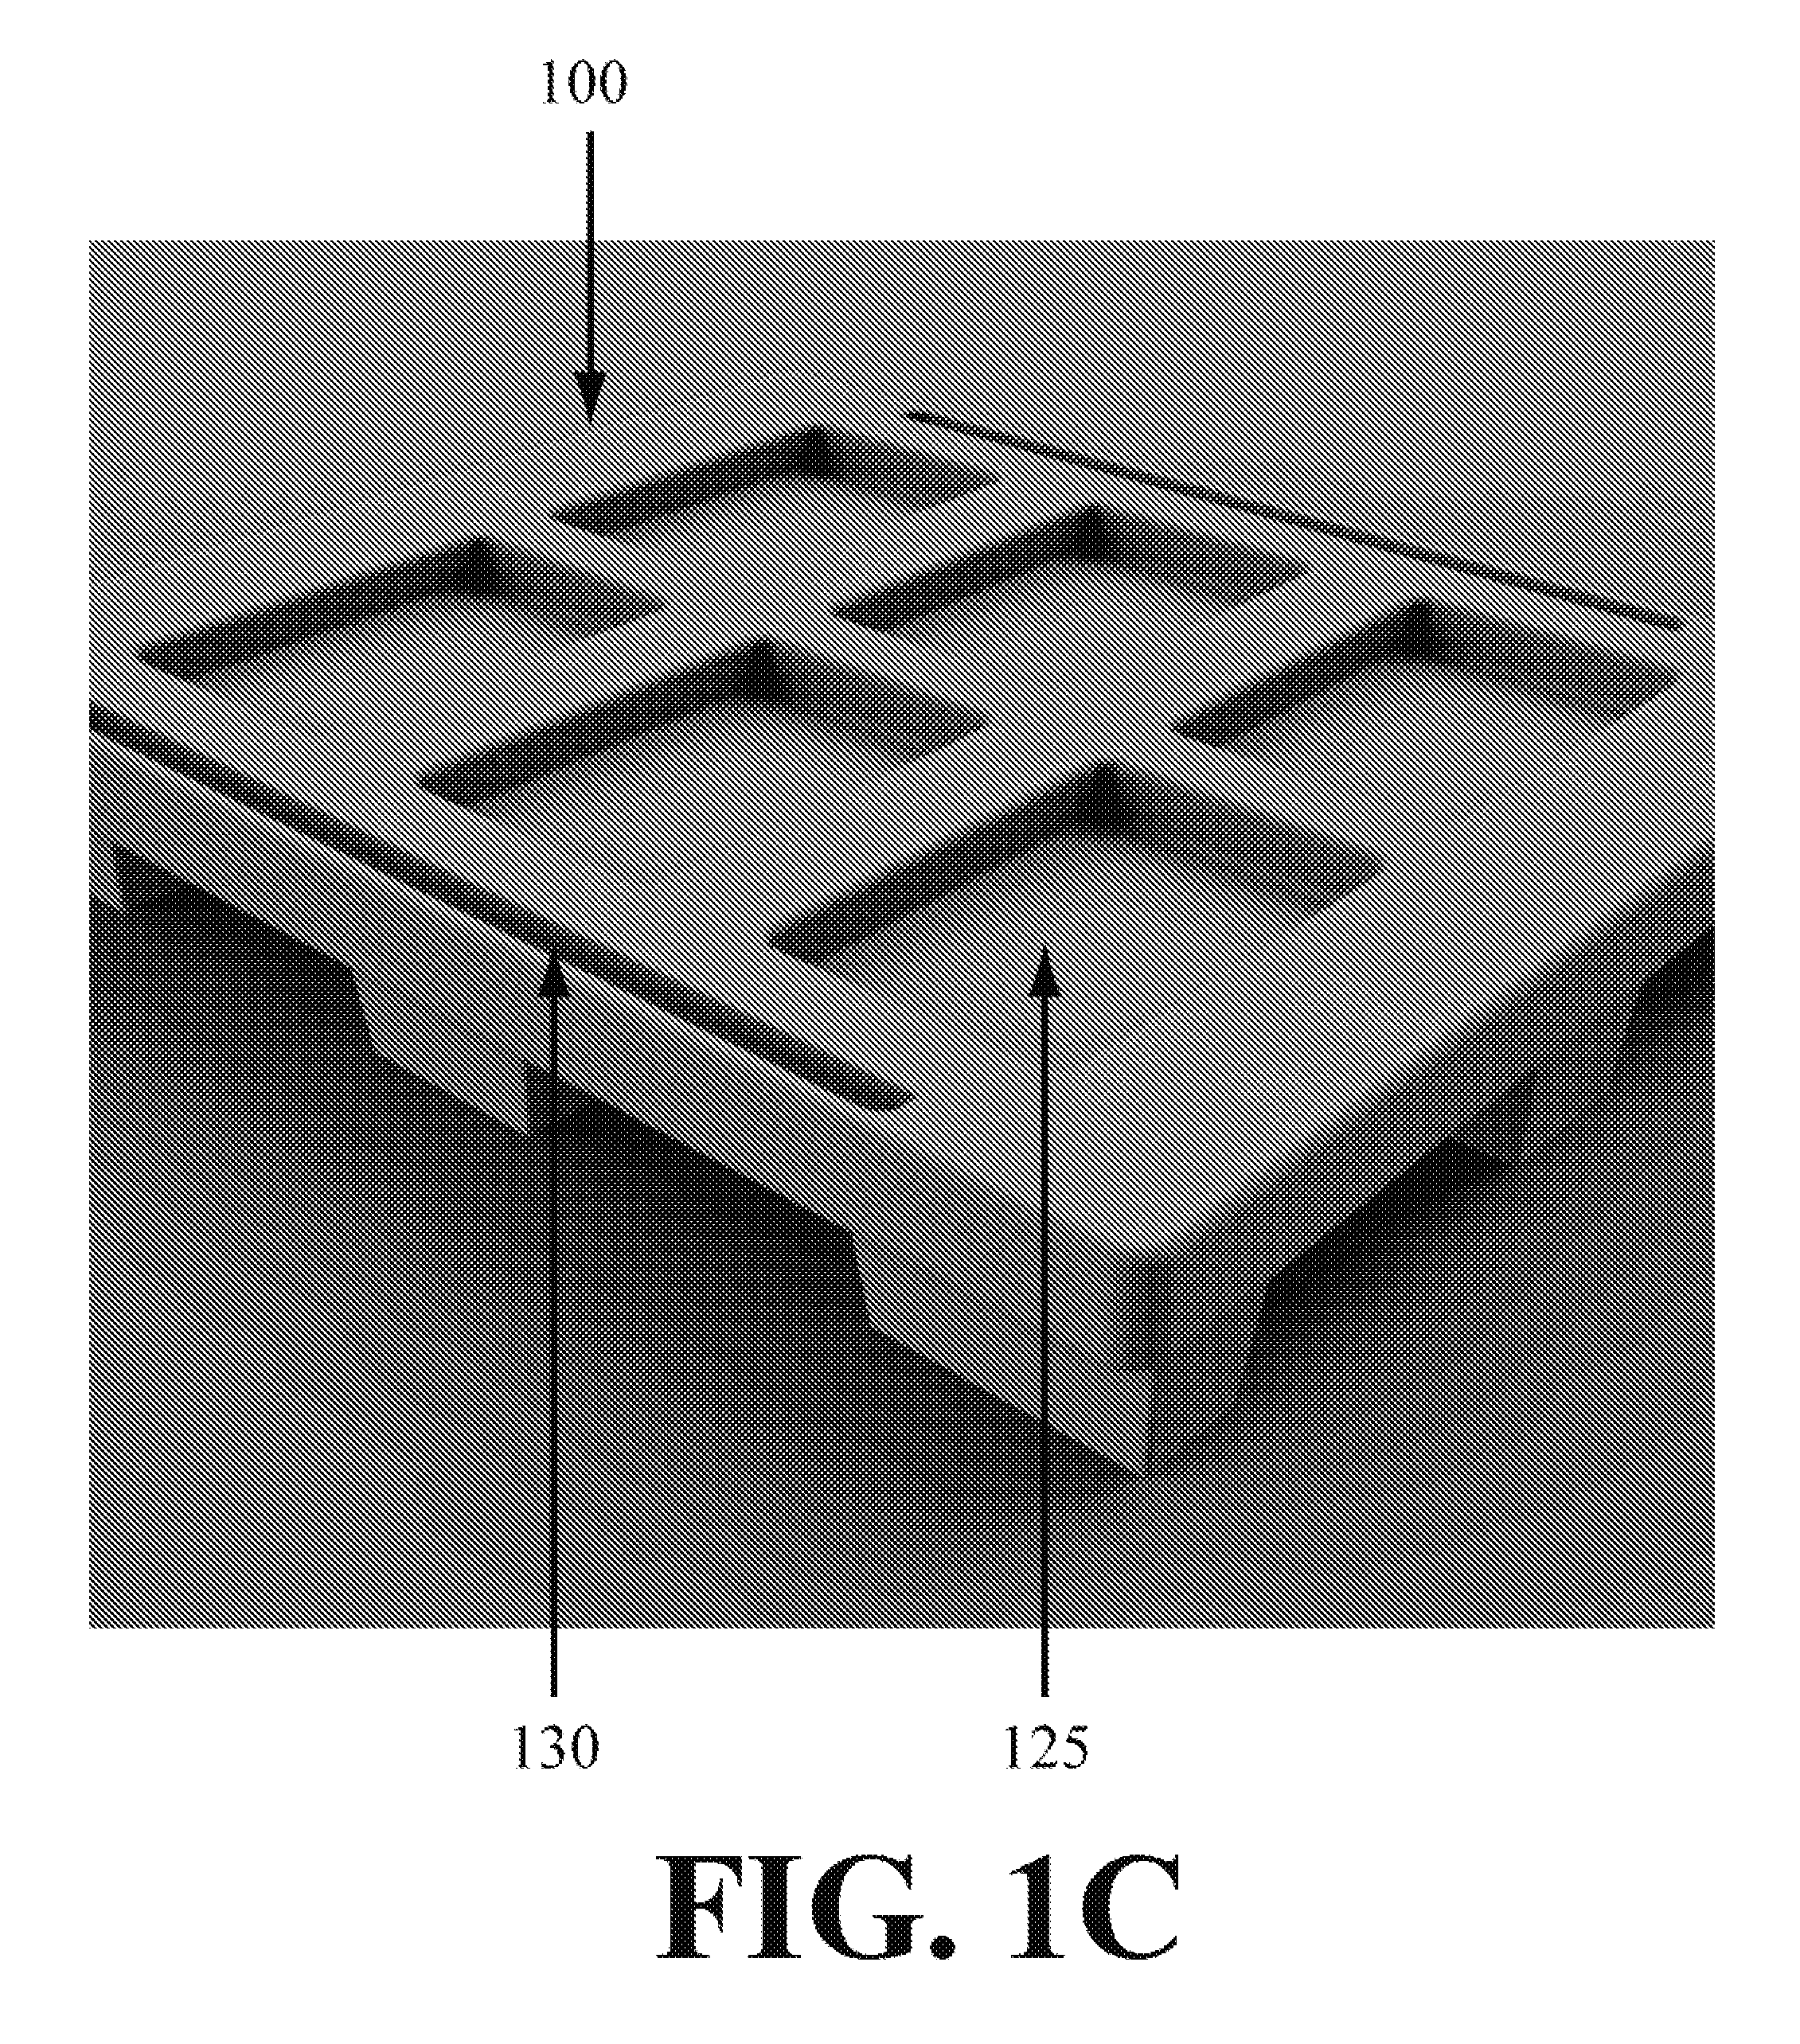 Cargo container for storing and transporting cargo